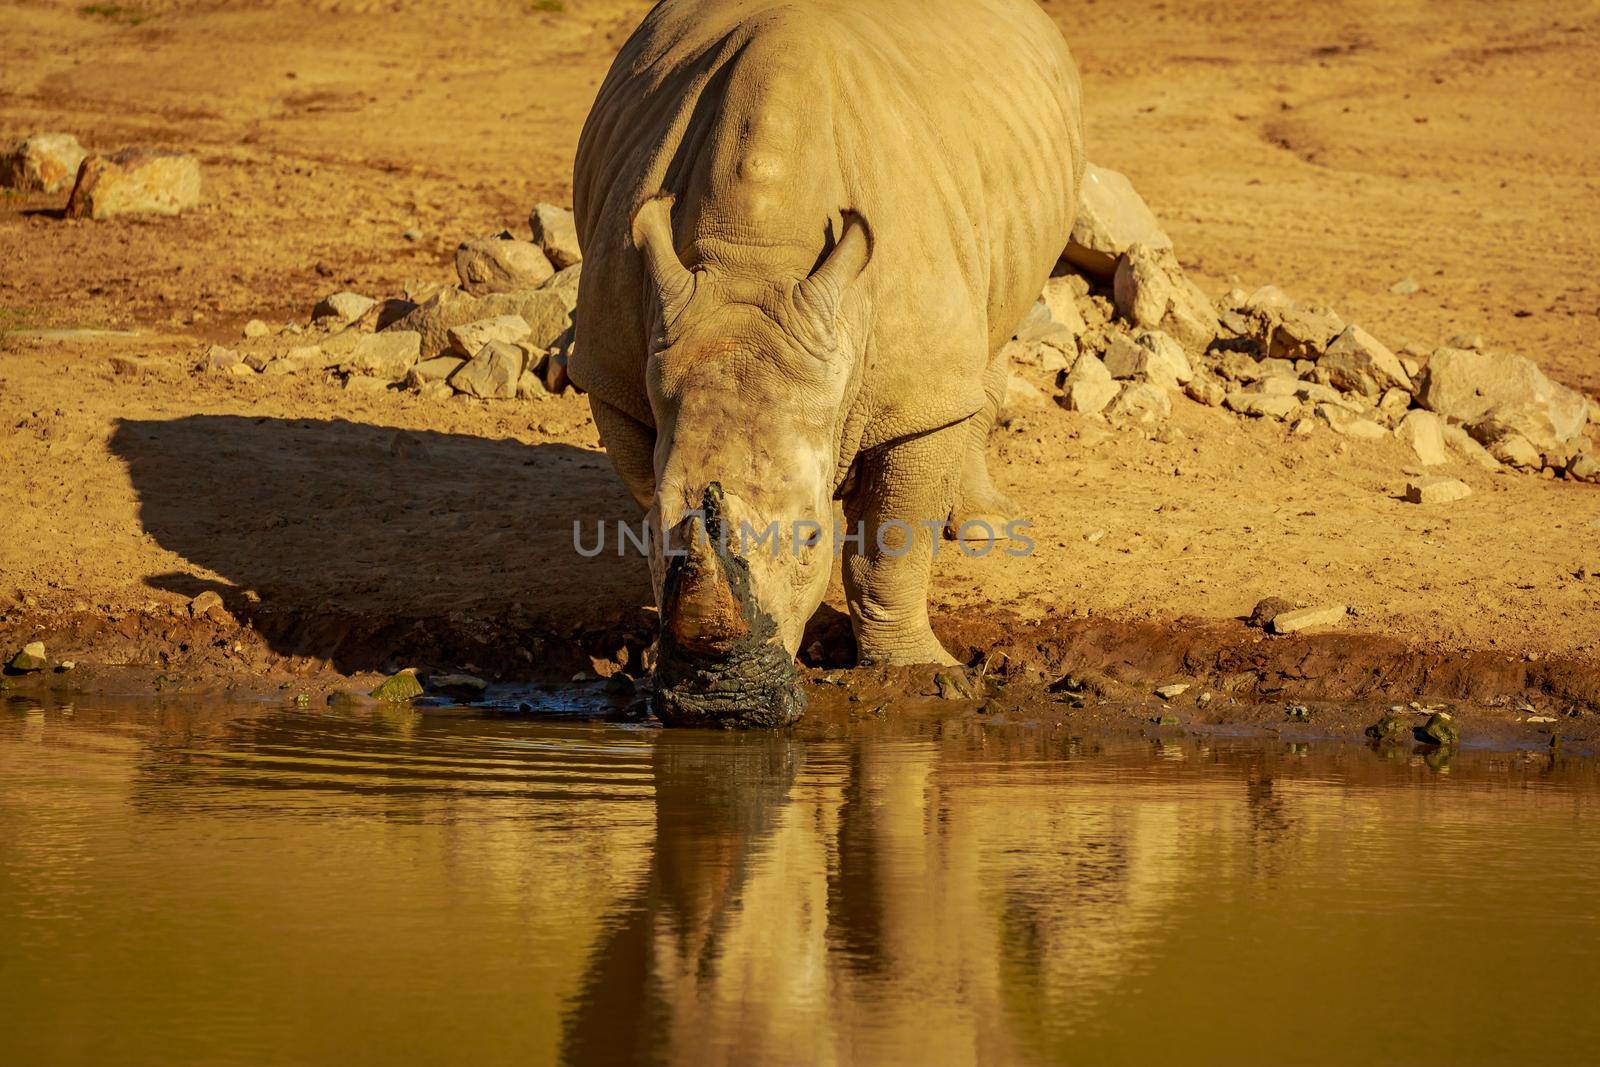 White Rhinoceros with mud on horn, after drinking in the river